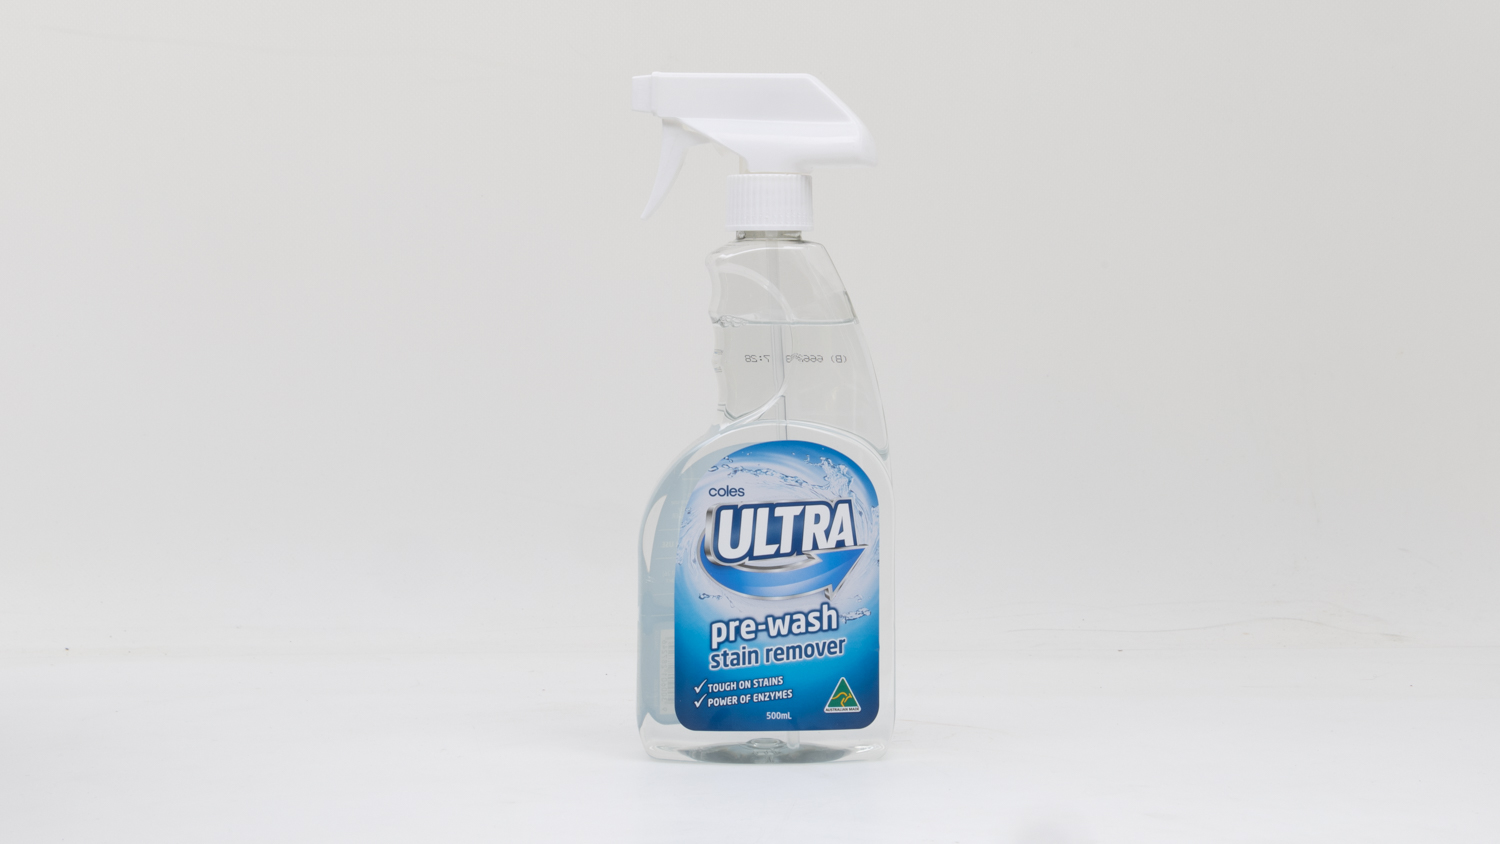 Coles Ultra Pre-wash Stain Remover carousel image